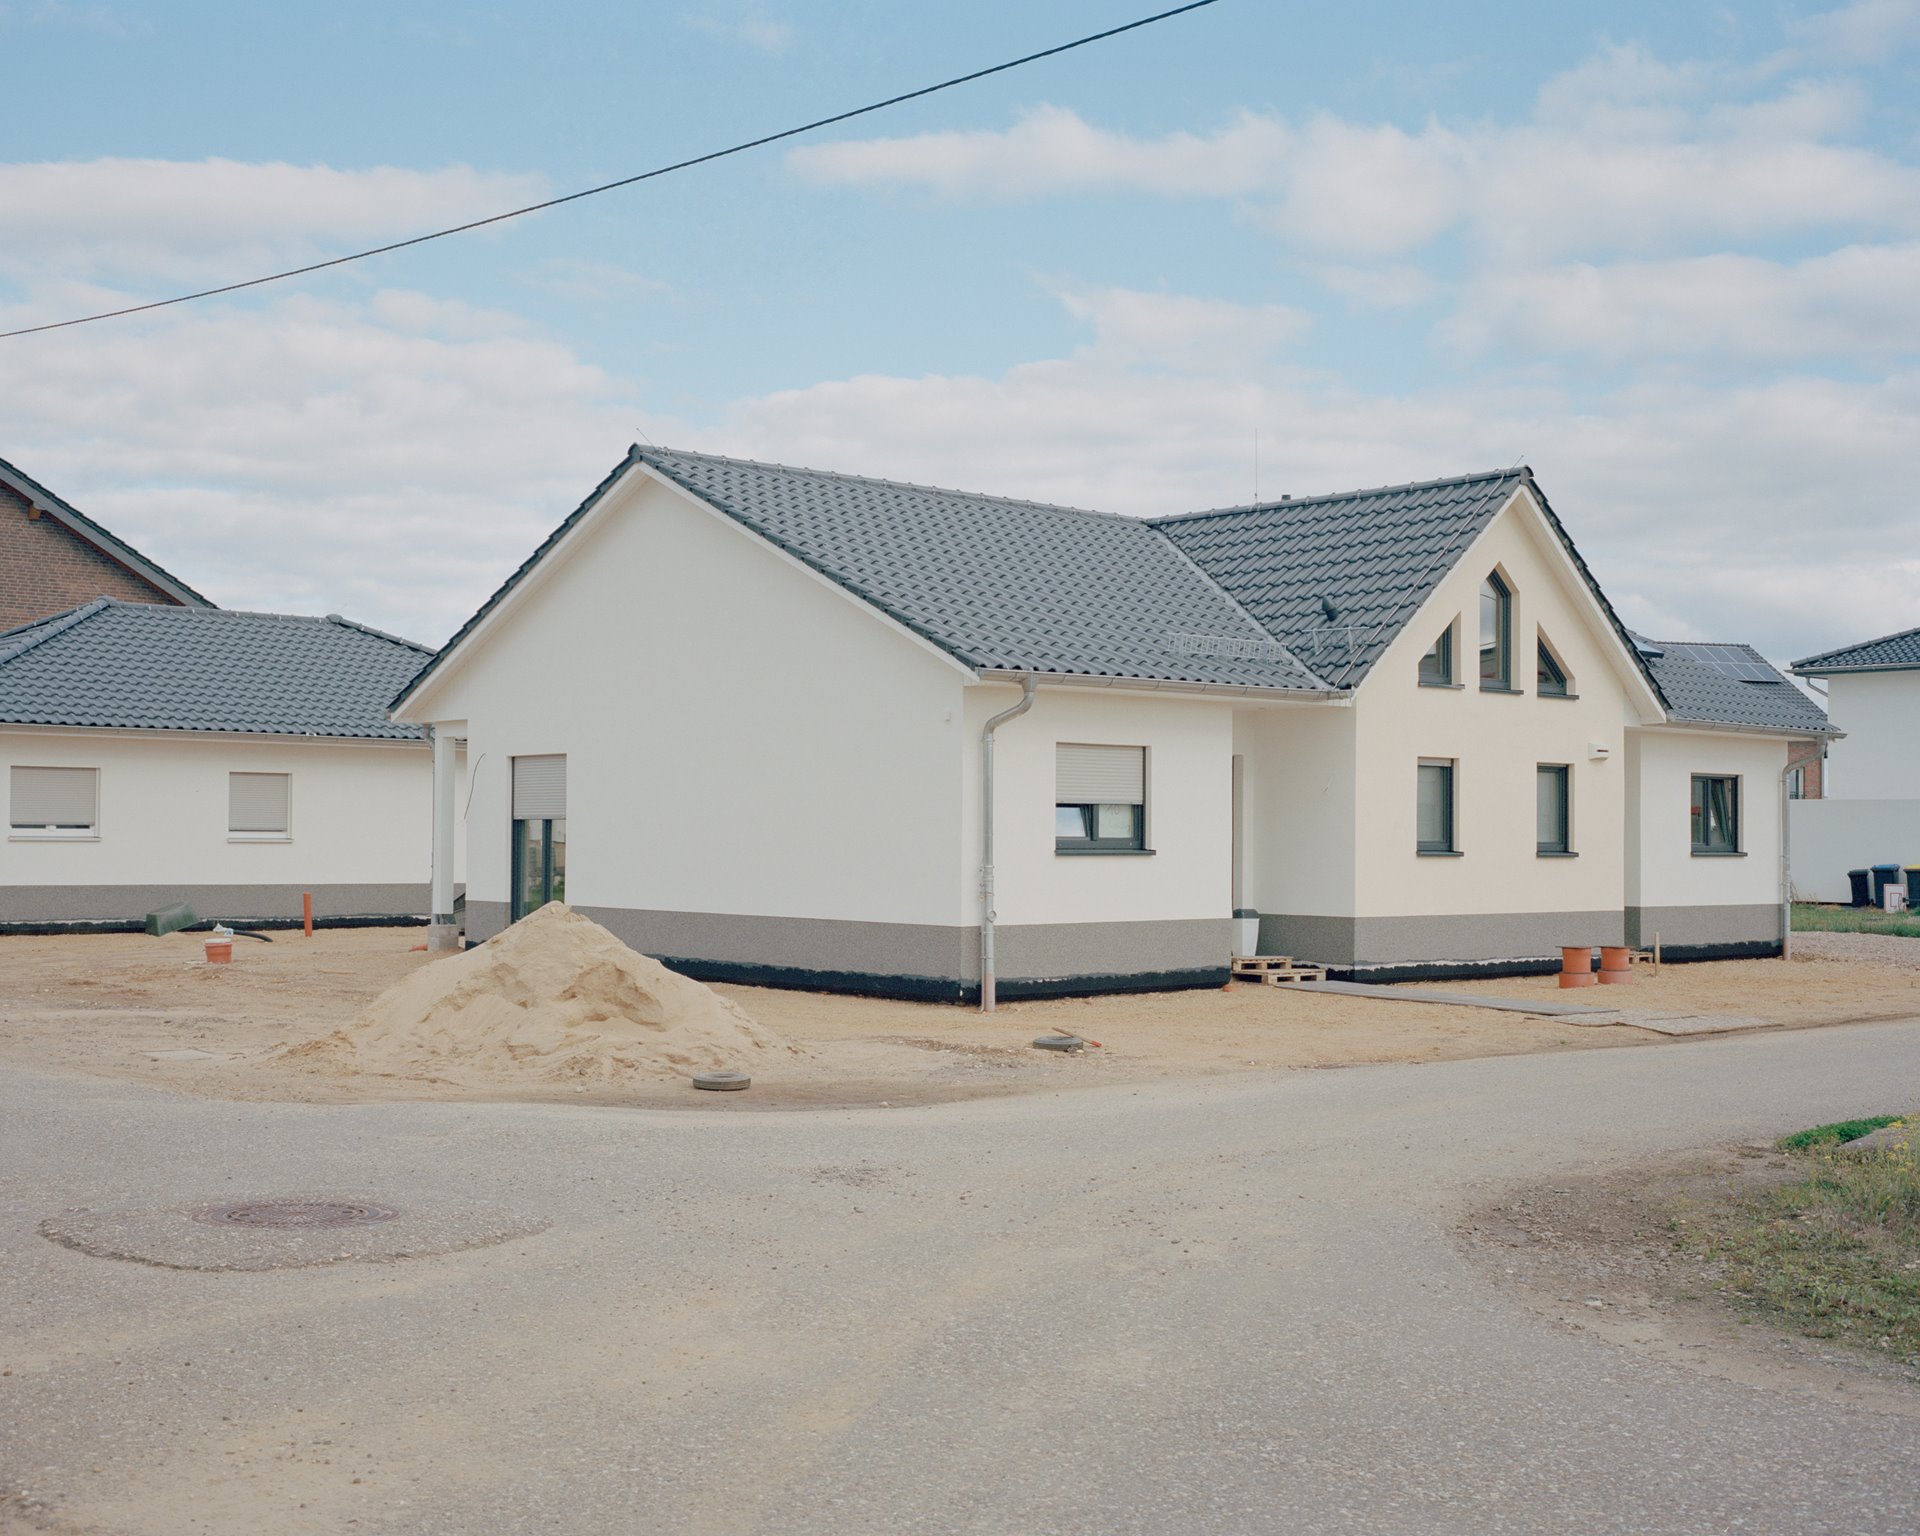 A newly built house stands at the Manheim-neu resettlement site, located a few kilometers away from the original village of Manheim, Germany. The ground-breaking ceremony for Manheim-neu took place in 2012. Around 1,630 people live there today.